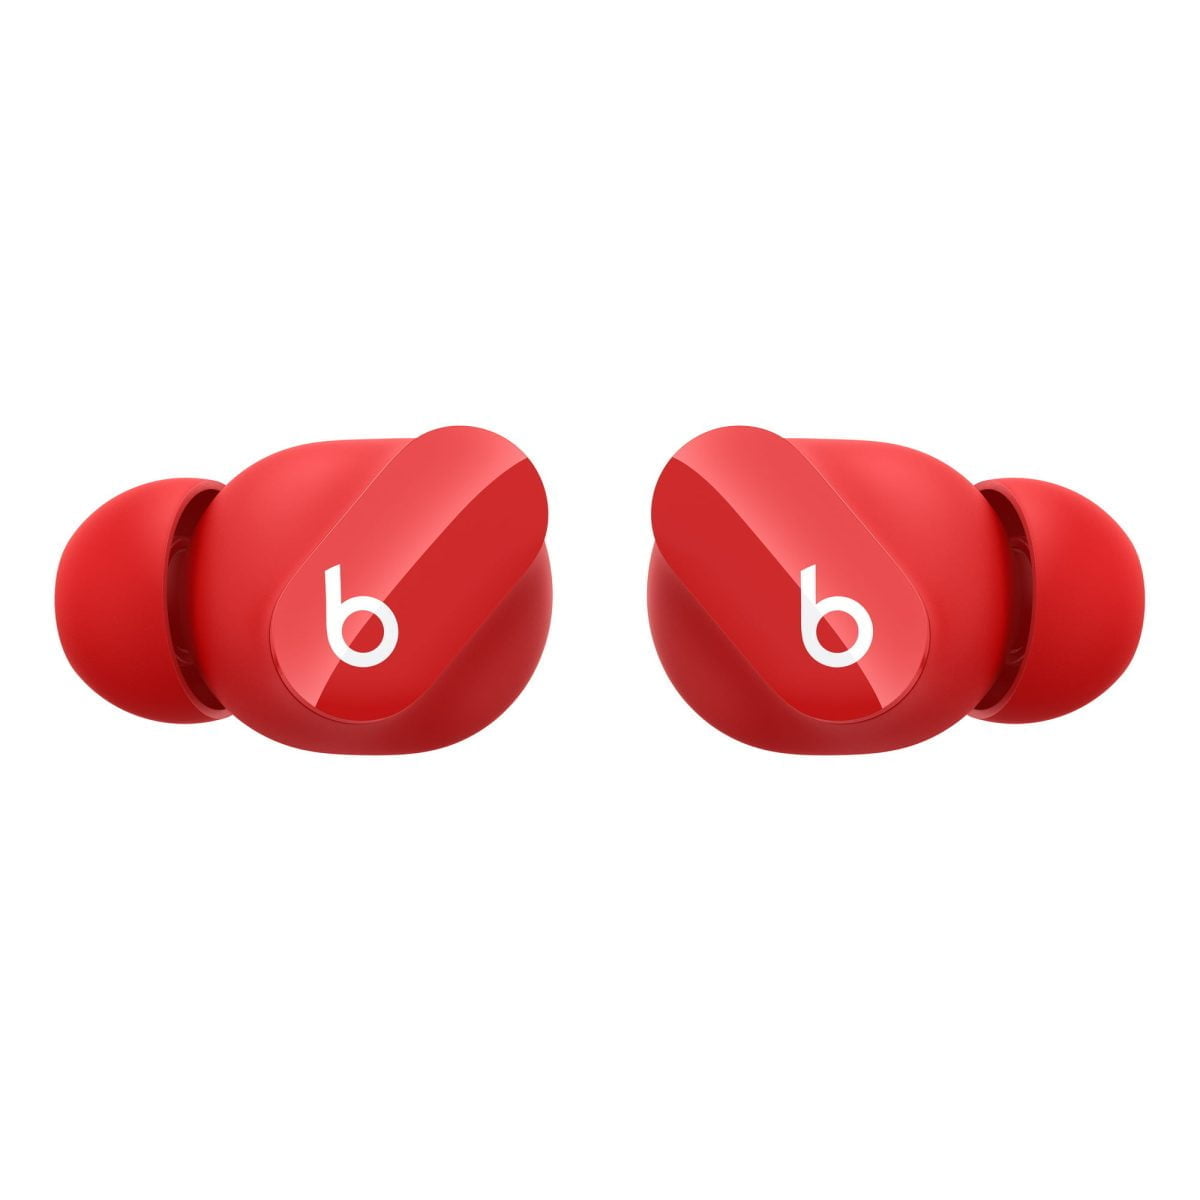 Mj503 Av2 Apple &Lt;H1 Data-Autom=&Quot;Sectiontitle&Quot;&Gt;Beats Studio Buds – True Wireless Noise Cancelling Earphones – Beats Red&Lt;/H1&Gt; &Lt;Div Class=&Quot;Rc-Pdsection-Mainpanel Column Large-9 Small-12&Quot;&Gt; &Lt;Div Class=&Quot;Para-List&Quot;&Gt; Custom Acoustic Platform Delivers Powerful, Balanced Sound &Lt;/Div&Gt; &Lt;Div Class=&Quot;Para-List&Quot;&Gt; Active Noise Cancelling (Anc) Blocks External Noise For Immersive Listening &Lt;/Div&Gt; &Lt;Div Class=&Quot;Para-List&Quot;&Gt; Easily Switch To Transparency Mode To Hear The World Around You &Lt;/Div&Gt; &Lt;Div Class=&Quot;Para-List&Quot;&Gt; Simple One-Touch Pairing For Both Apple&Lt;Sup&Gt;6&Lt;/Sup&Gt; And Android&Lt;Sup&Gt;7&Lt;/Sup&Gt; Devices &Lt;/Div&Gt; &Lt;Div Class=&Quot;Para-List&Quot;&Gt; High-Quality Call Performance And Voice Assistant Interaction Via Dual Beamforming Mics &Lt;/Div&Gt; &Lt;Div Class=&Quot;Para-List&Quot;&Gt; Ipx4-Rated Sweat And Water Resistant Wireless Earbuds&Lt;Sup&Gt;4&Lt;/Sup&Gt; &Lt;/Div&Gt; &Lt;Div Class=&Quot;Para-List&Quot;&Gt; Three Soft Eartip Sizes For A Stable And Comfortable Fit While Ensuring An Optimal Acoustic Seal &Lt;/Div&Gt; &Lt;Div Class=&Quot;Para-List&Quot;&Gt; Up To 8 Hours Of Listening Time&Lt;Sup&Gt;1&Lt;/Sup&Gt; (Up To 24 Hours Combined With Pocket-Sized Charging Case)&Lt;Sup&Gt;2&Lt;/Sup&Gt; &Lt;/Div&Gt; &Lt;Div Class=&Quot;Para-List&Quot;&Gt; Activate Siri Hands-Free Just By Saying “Hey Siri”&Lt;Sup&Gt;8&Lt;/Sup&Gt; &Lt;/Div&Gt; &Lt;Div Class=&Quot;Para-List&Quot;&Gt; Industry-Leading Class 1 Bluetooth For Extended Range And Fewer Dropouts &Lt;/Div&Gt; &Lt;Div Class=&Quot;Para-List As-Pdp-Lastparalist&Quot;&Gt; Usb-C Universal Charging &Lt;/Div&Gt; &Lt;/Div&Gt; Beats Studio Buds Red Beats Studio Buds – True Wireless Noise Cancelling Earphones – Beats Red